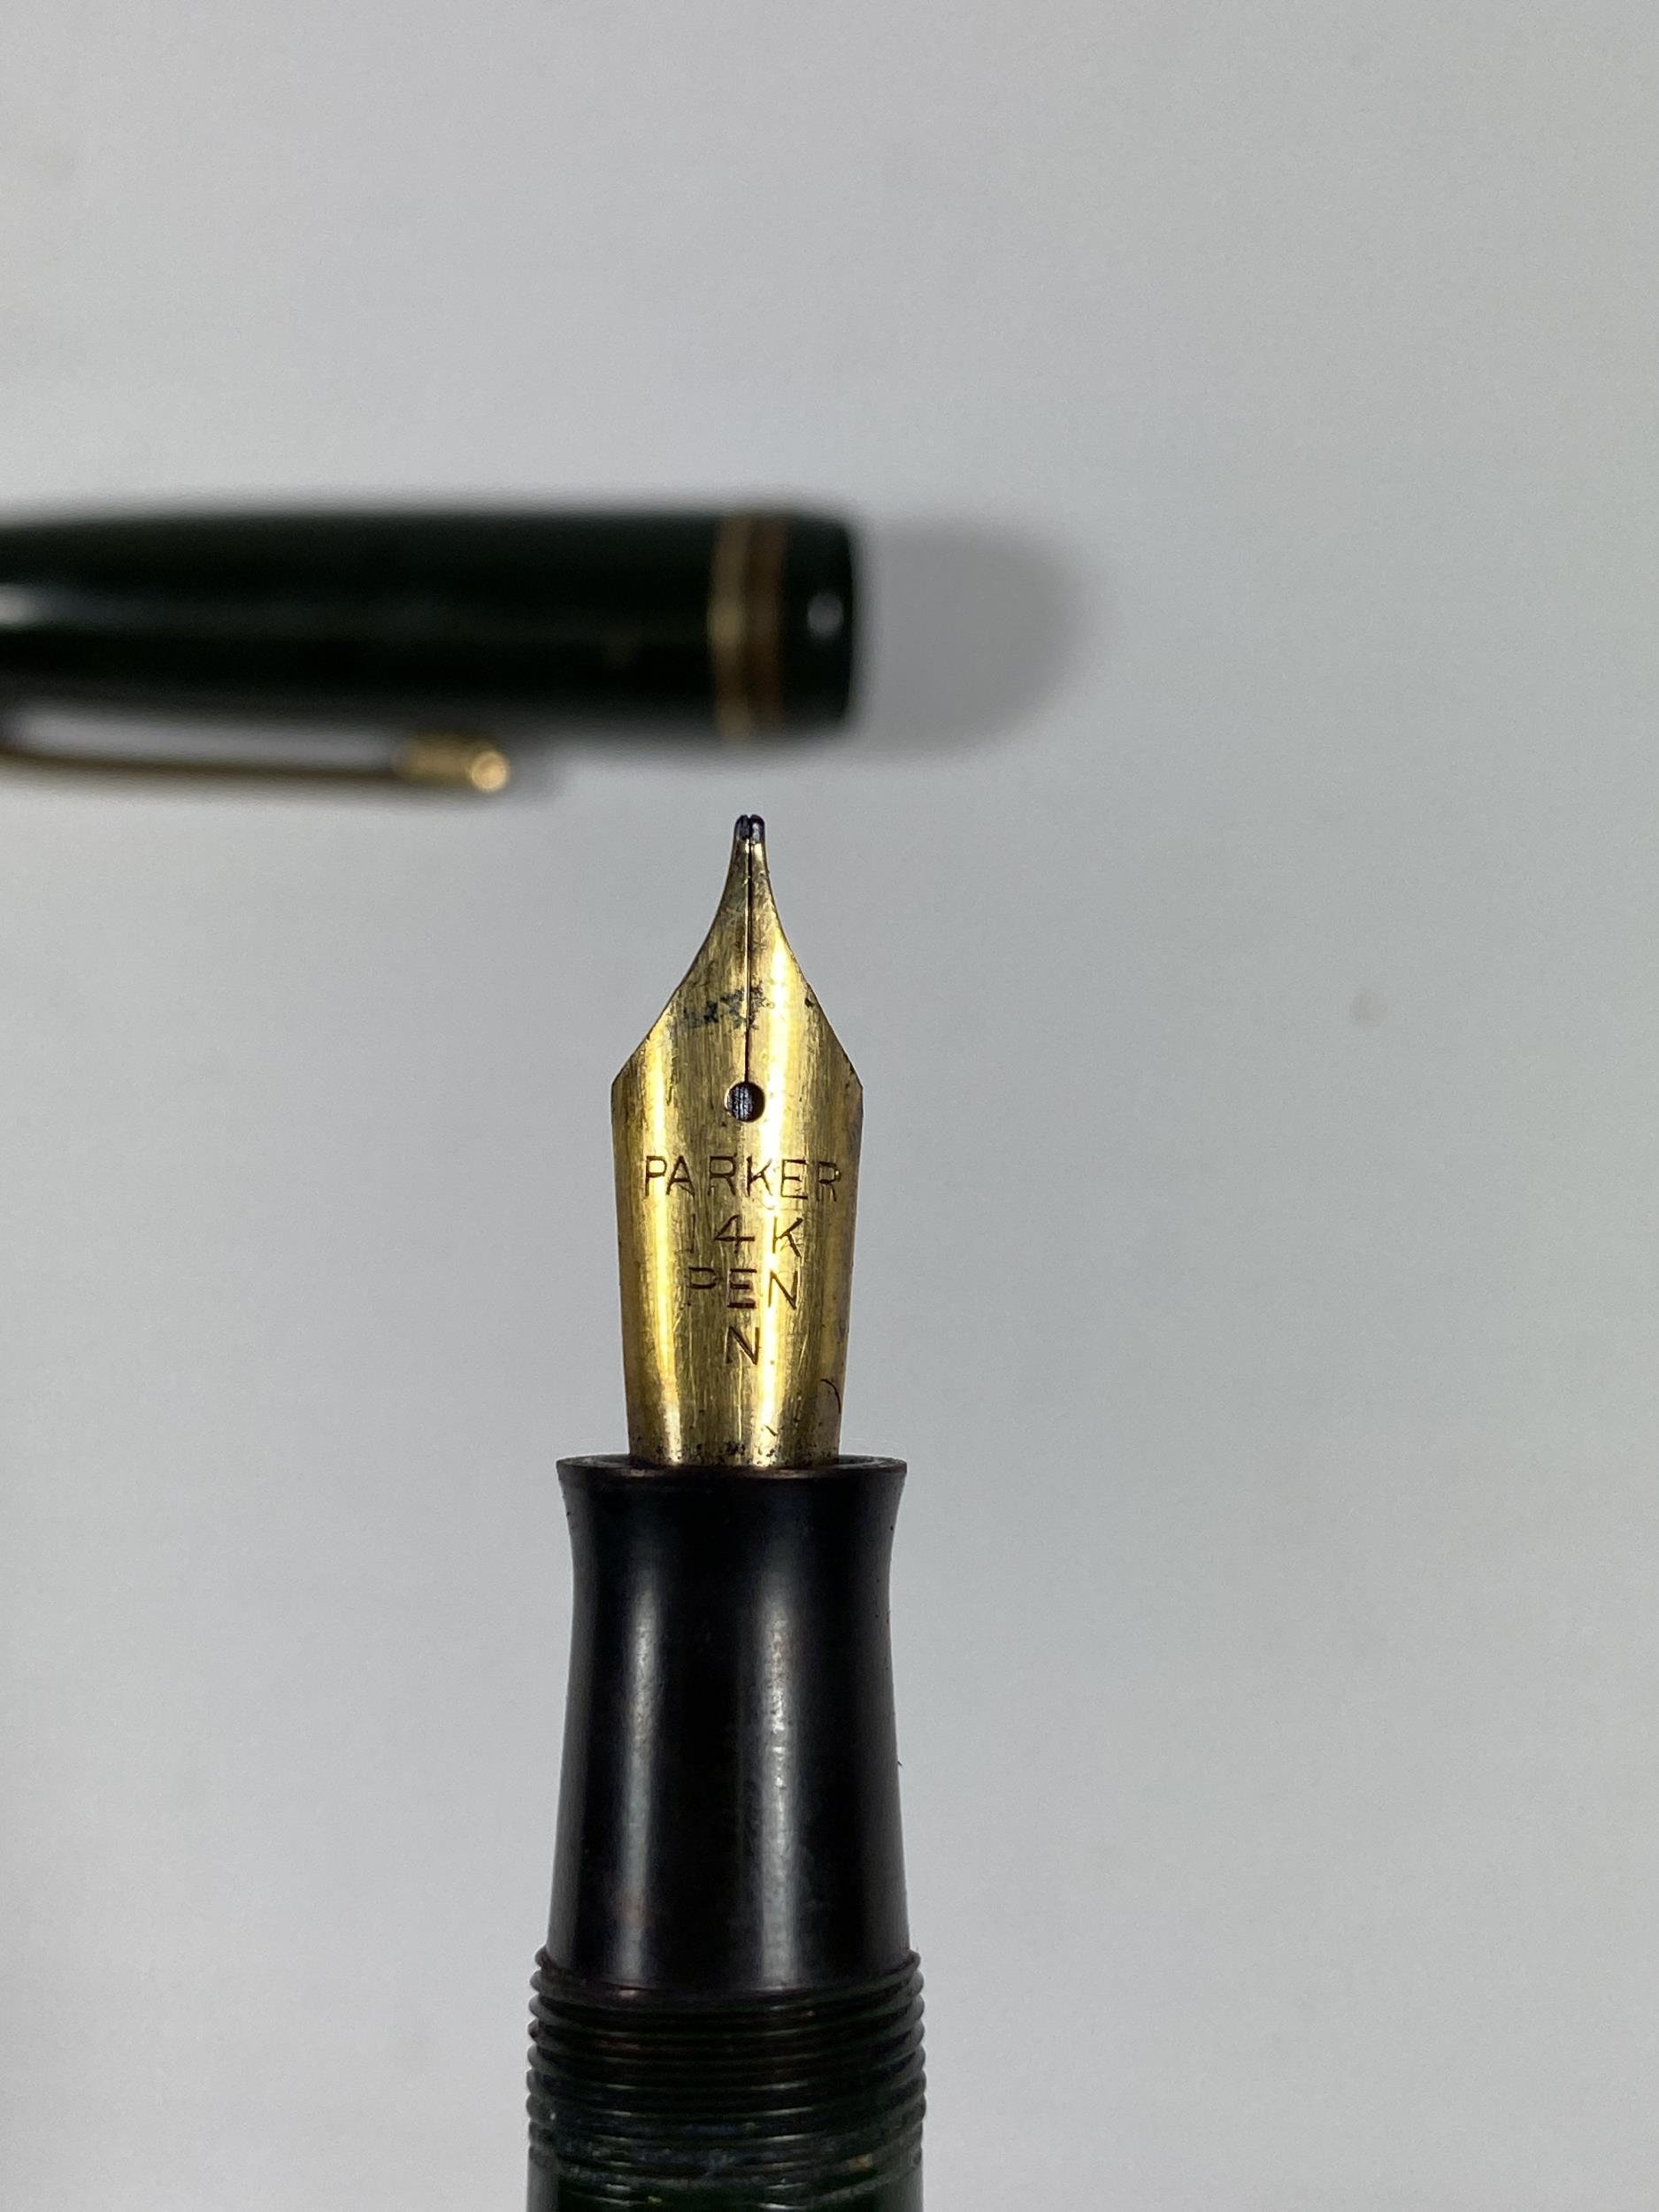 A VINTAGE PARKER 14CT GOLD NIBBED FOUNTAIN PEN - Image 2 of 2